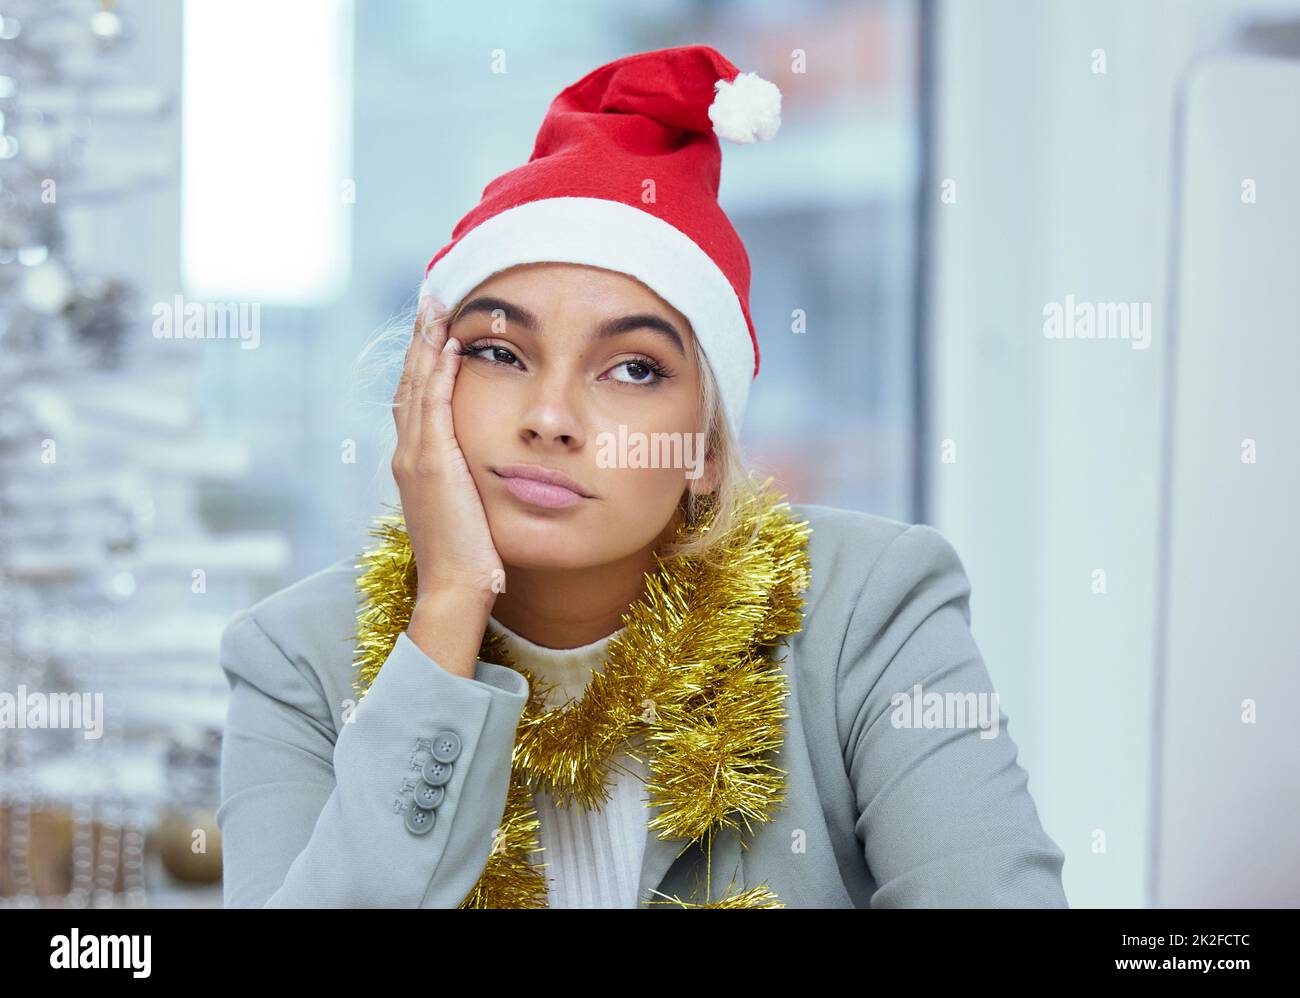 Cant wait to get outta here. Shot of a sad young woman lost in thought at her desk in the office. Stock Photo